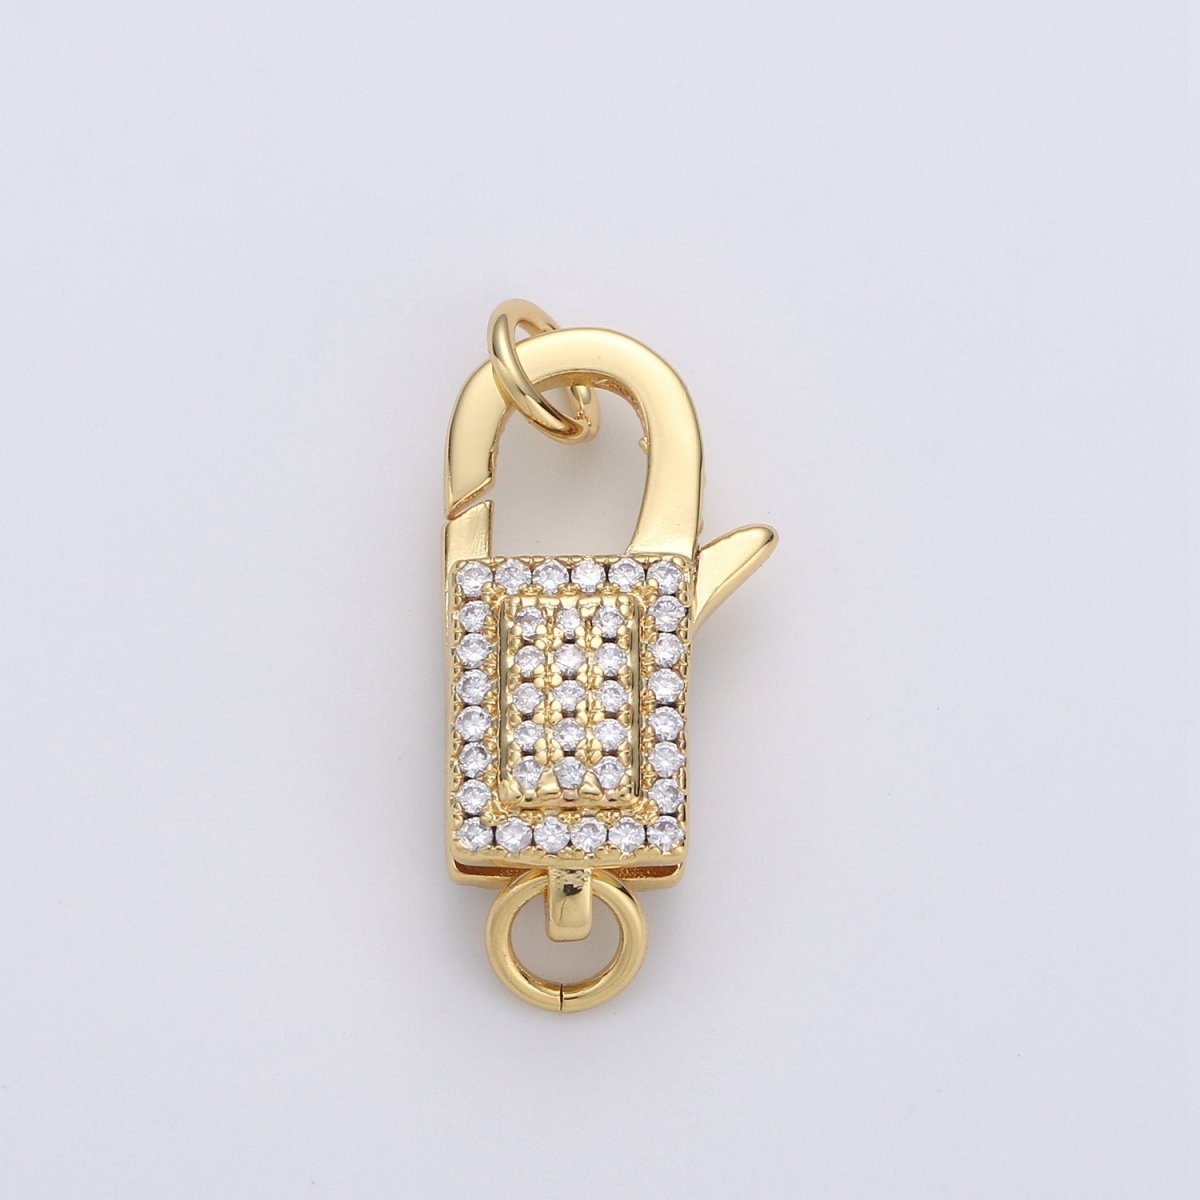 Pave Lobster Clasp, Micro Pave CZ Lobster Clasp, CZ Enhancer Clasp,Pave Bail Clasp,Large Pendant Pave Clasp, Gold Silver Pave Clasp, 20x10mm K-611 - K-614 - DLUXCA